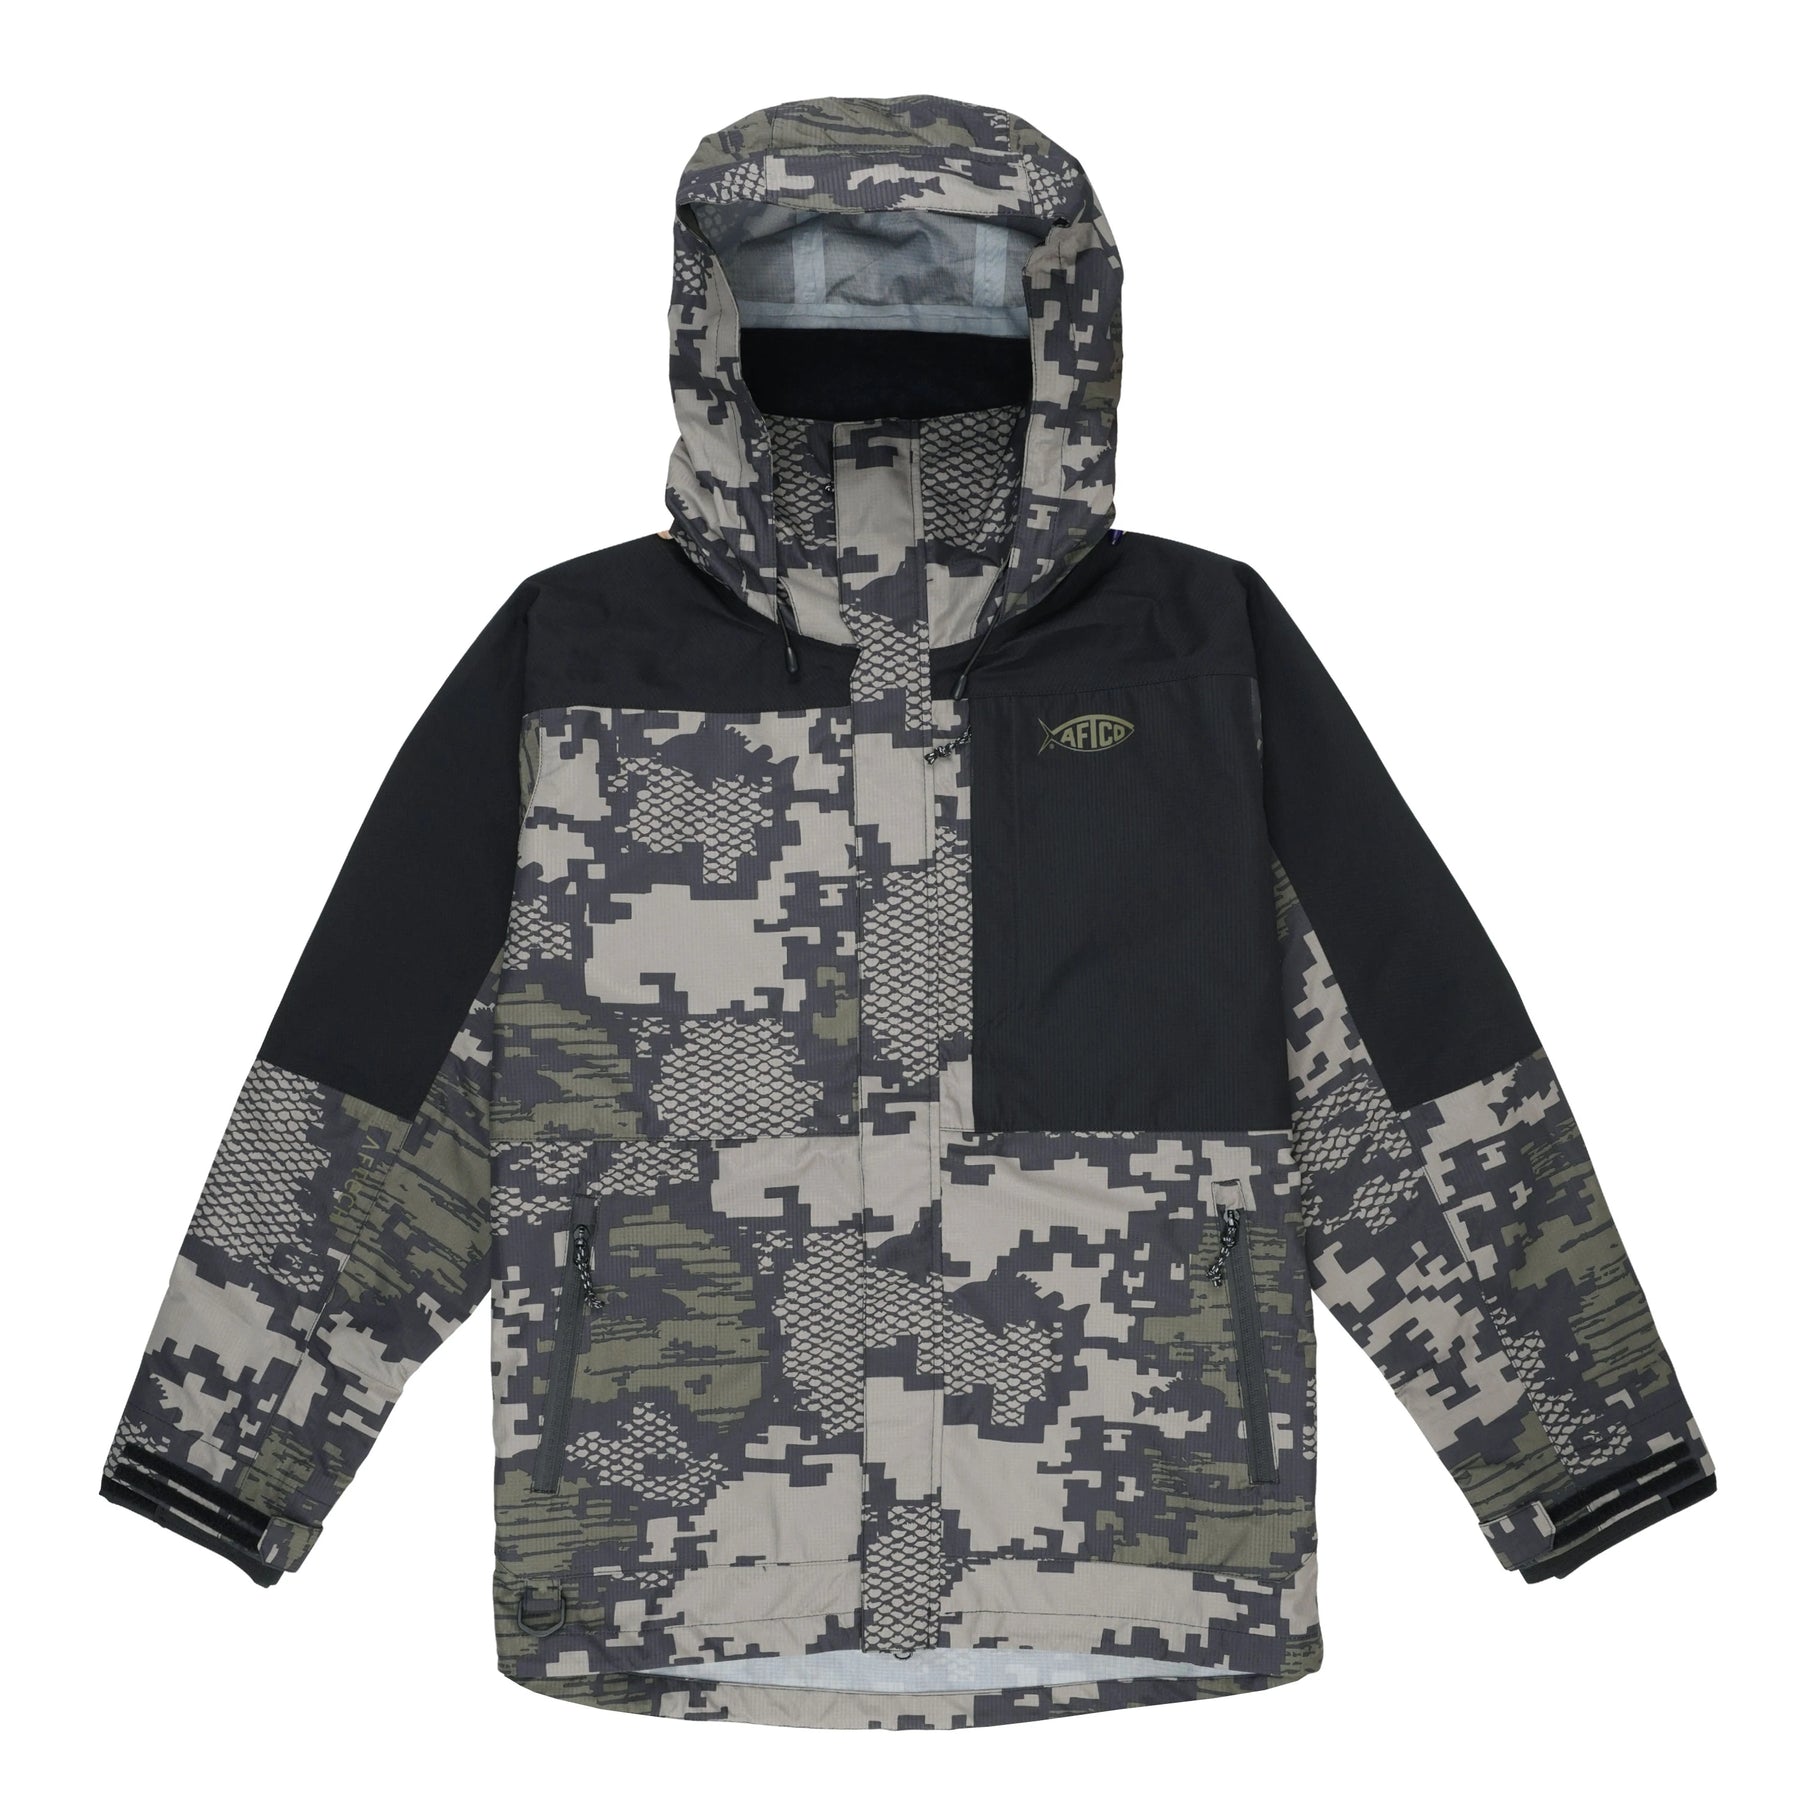 AFTCO Barricade Jacket - Green Camo - Large